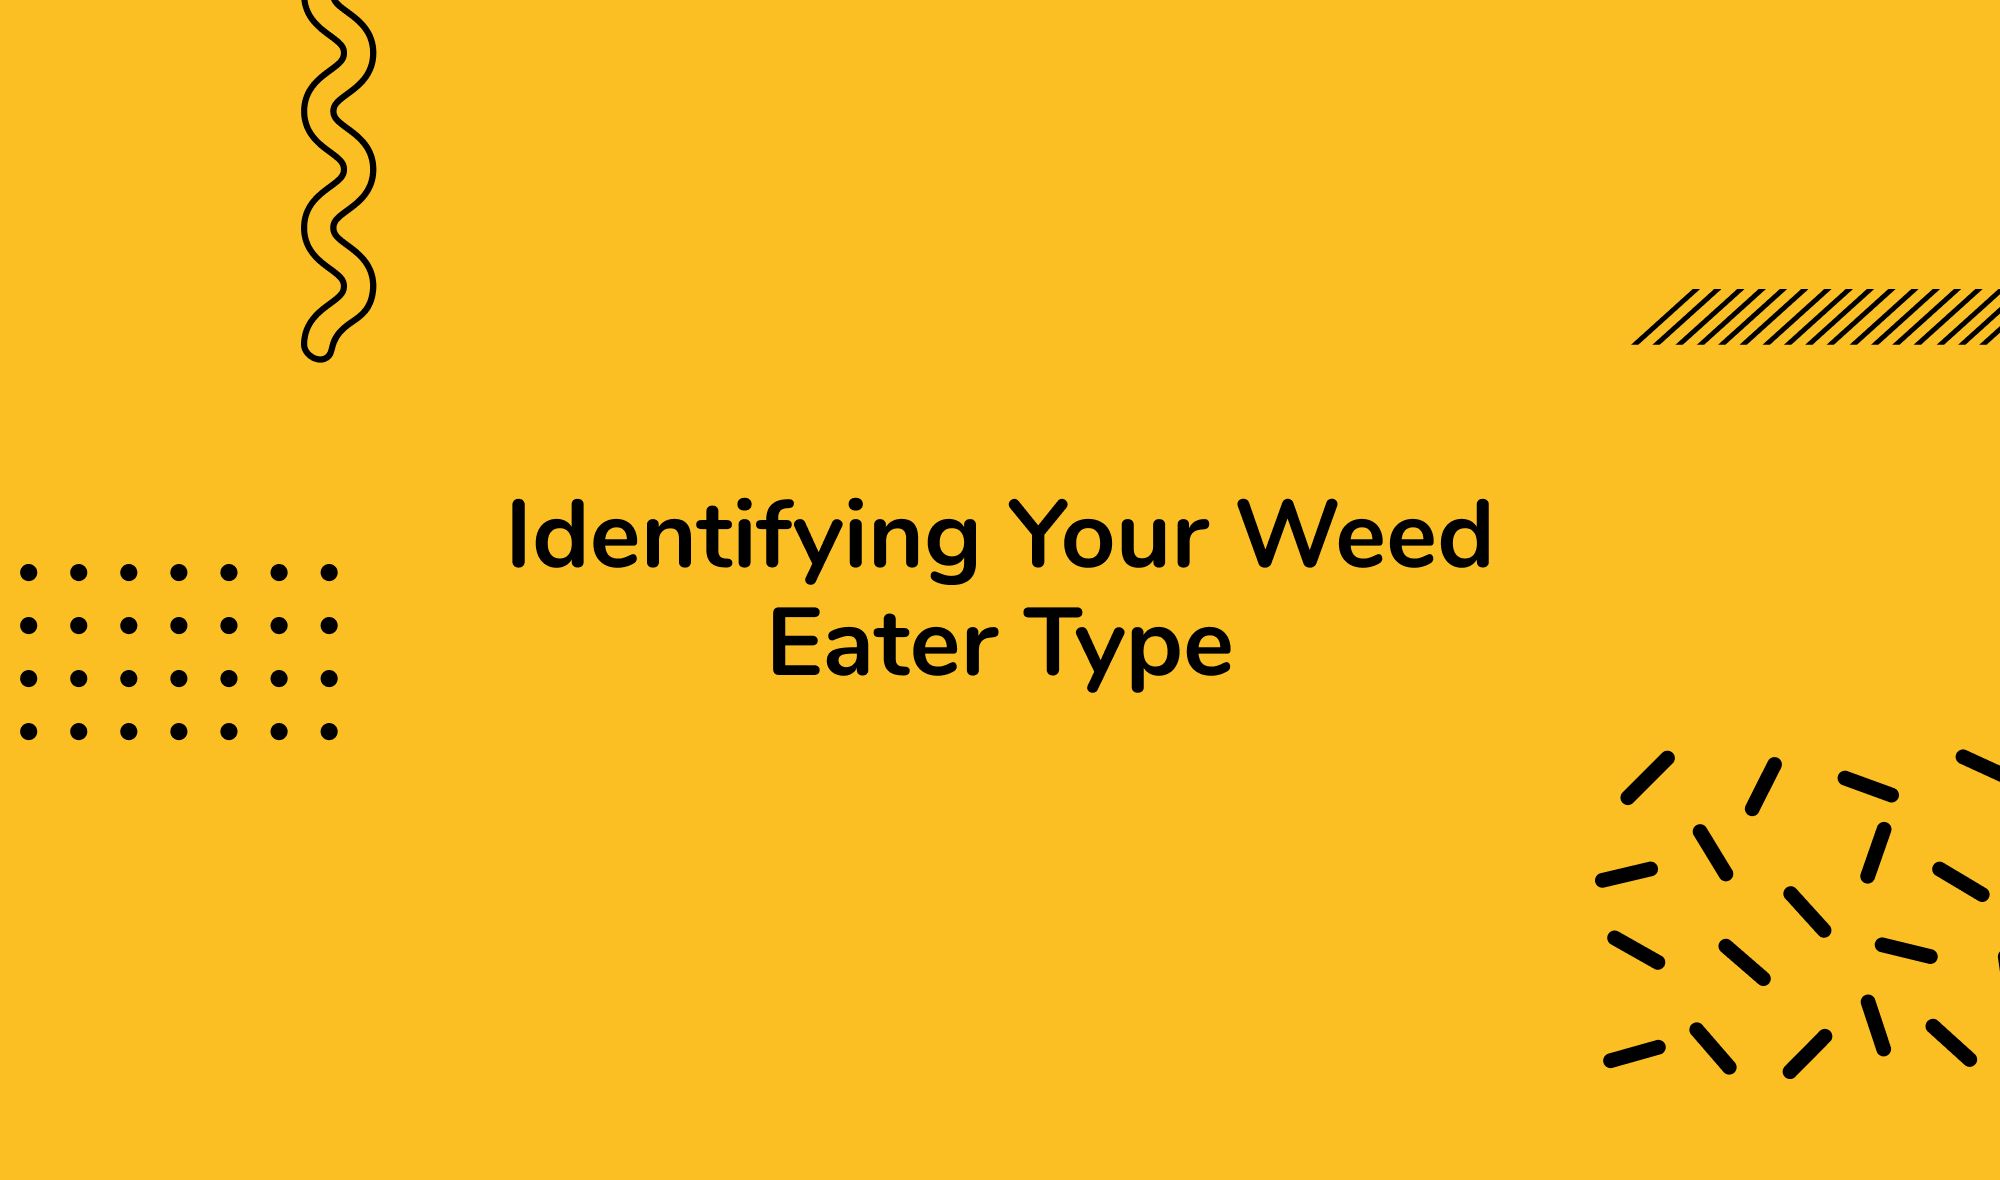 Identifying Your Weed Eater Type